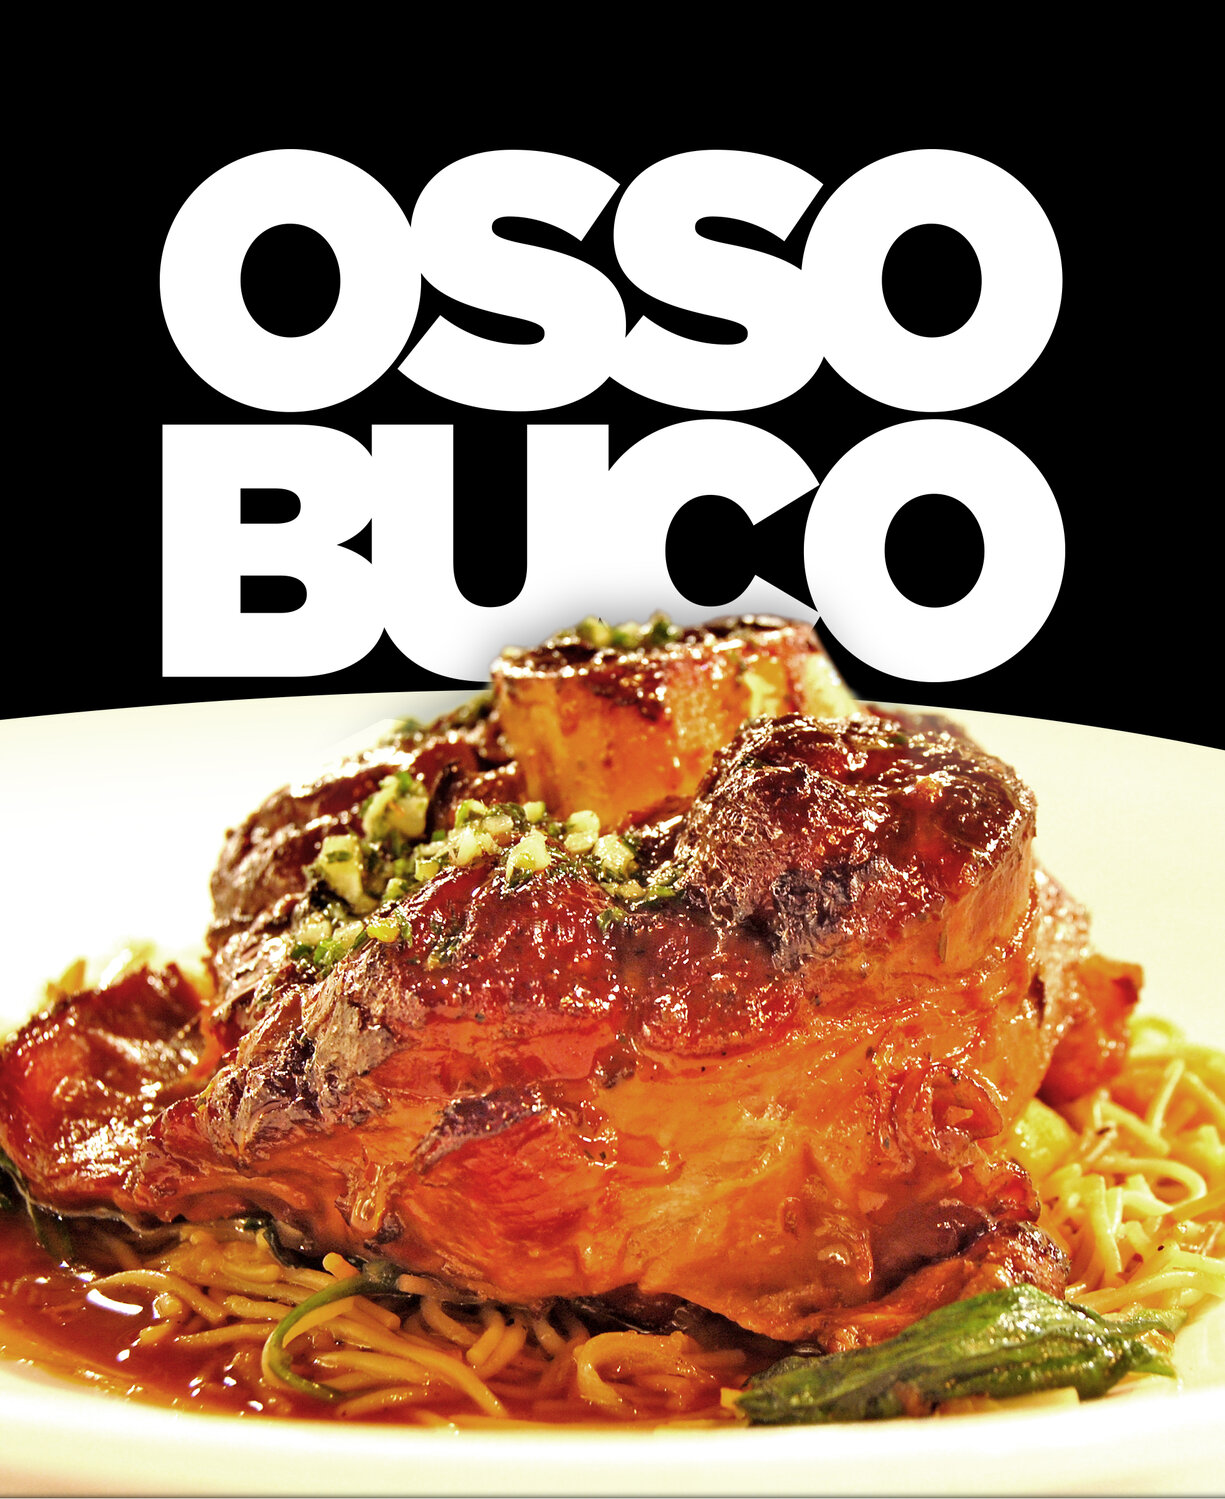 VENISON ON THE BONE: A deer shank can be transformed into delicious meals like this osso buco served over pasta.